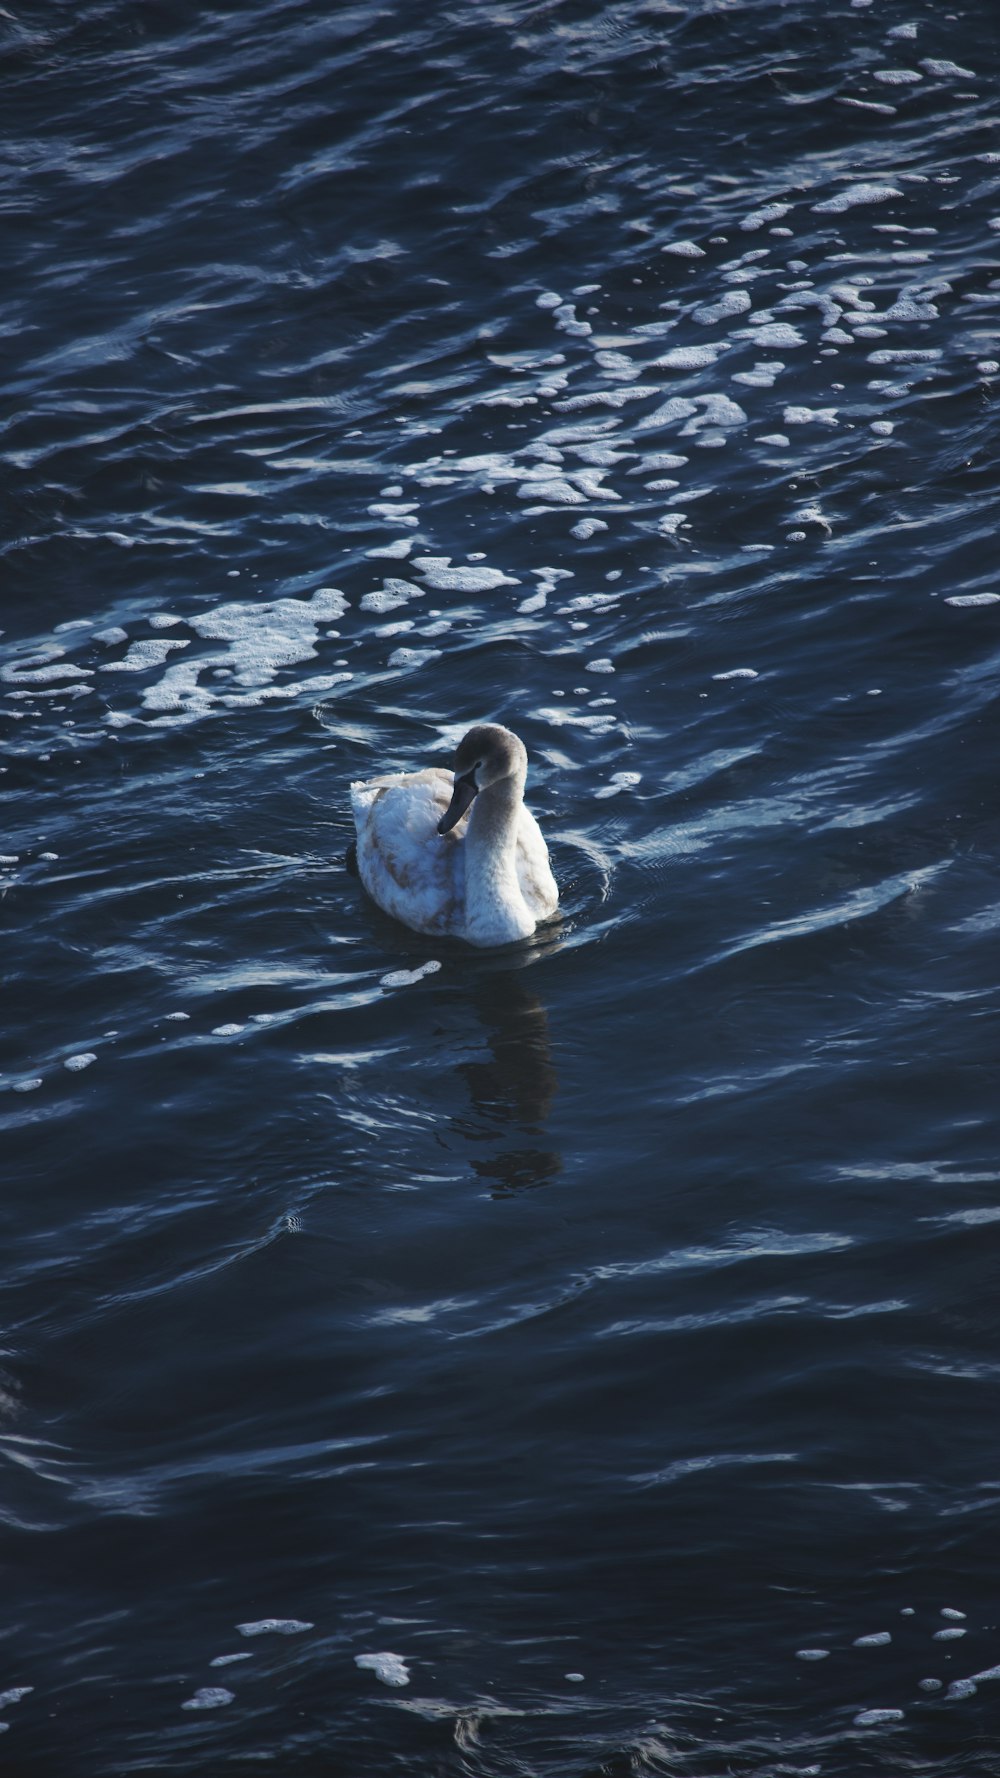 white duck on body of water during daytime